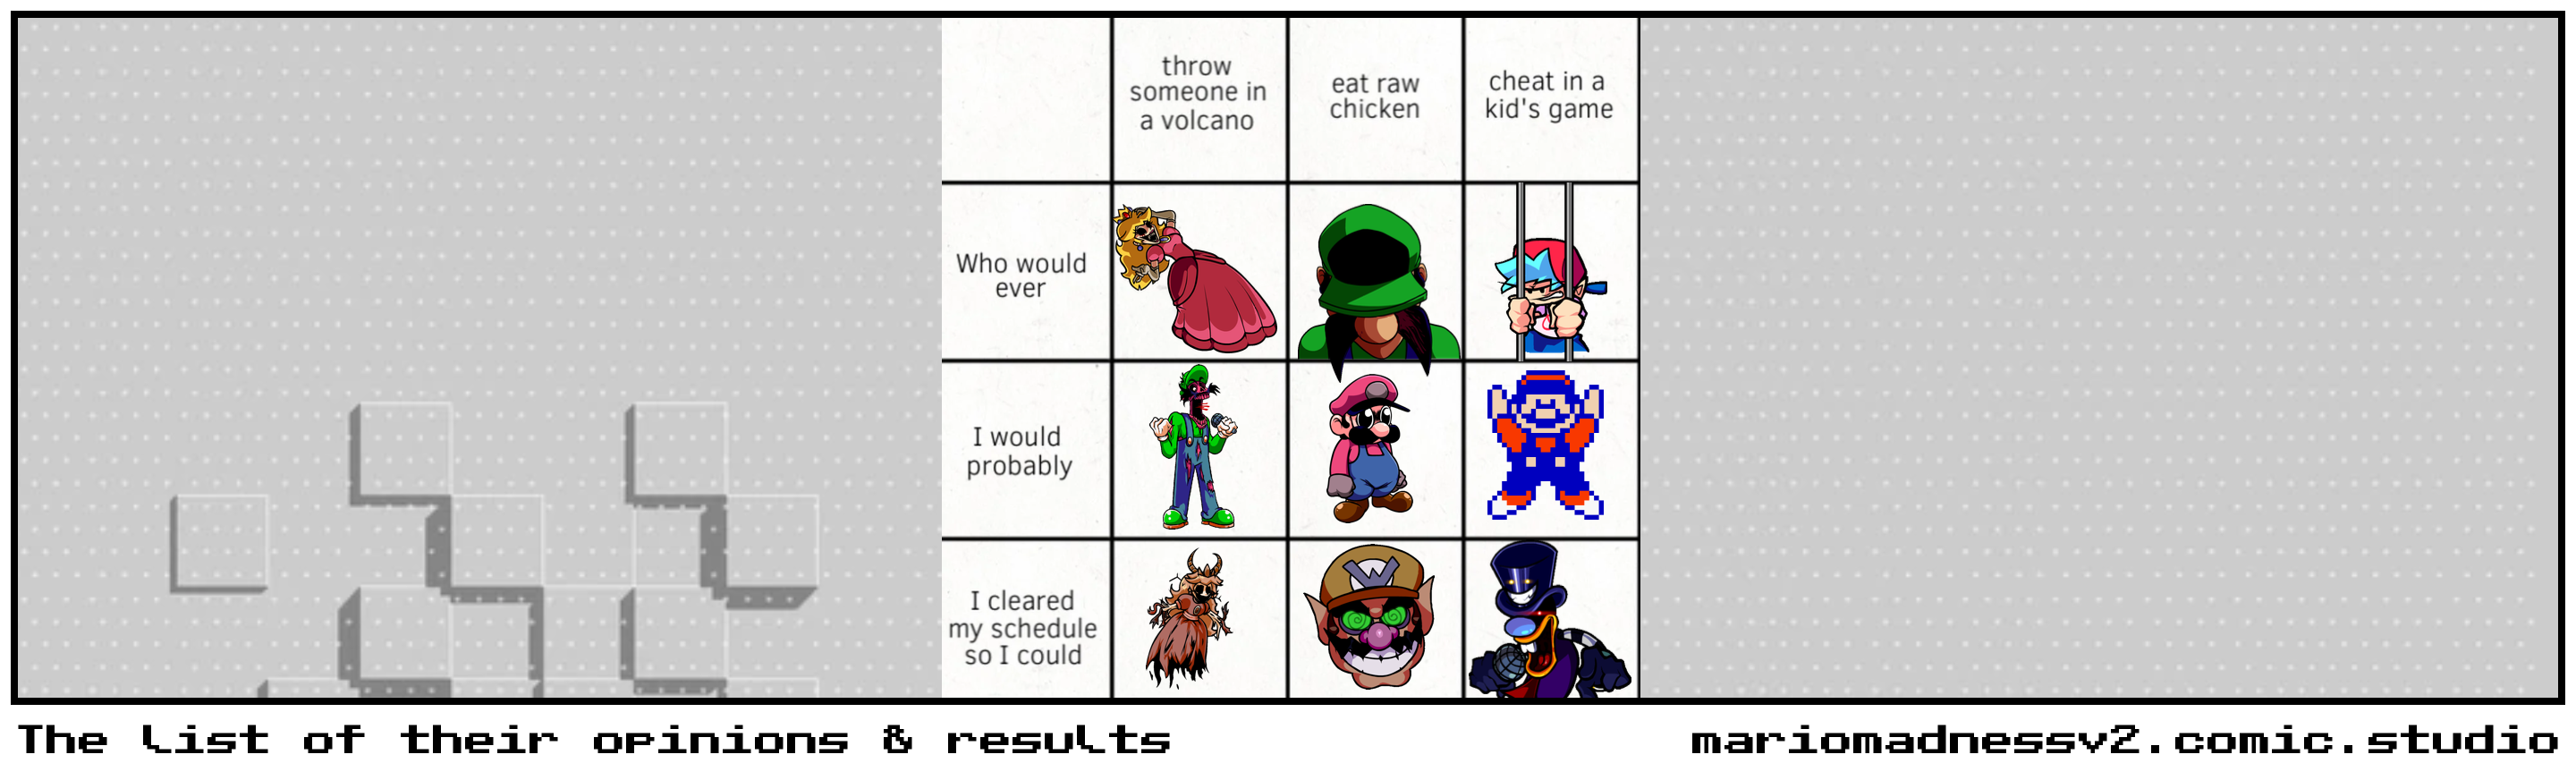 The list of their opinions & results